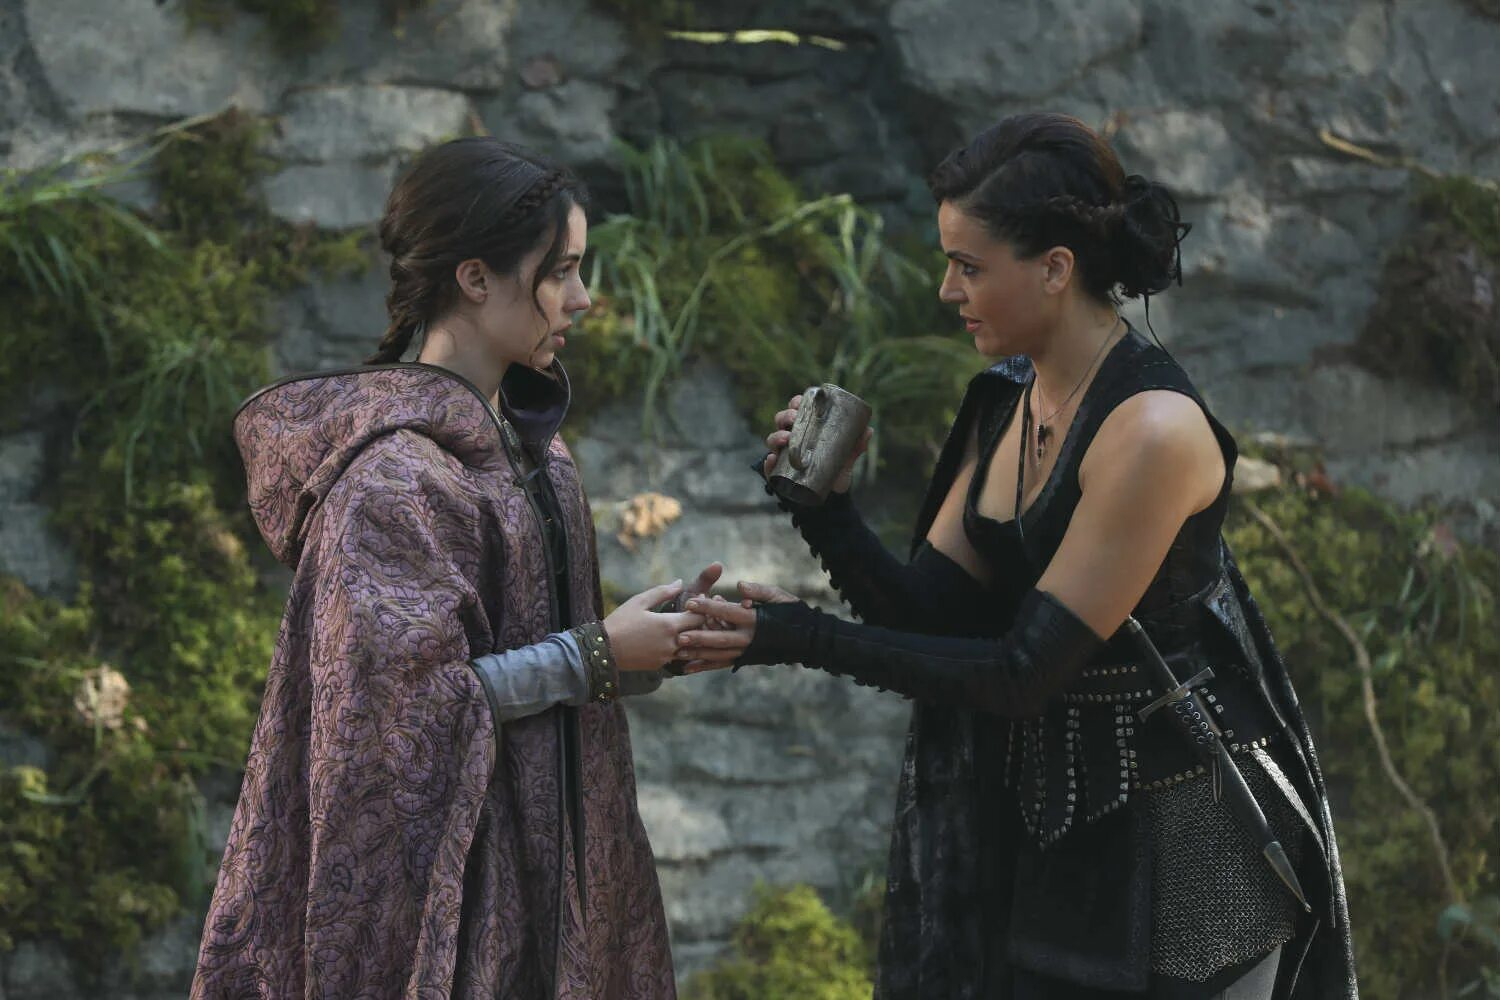 Once another. Adelaide Kane once upon a time.